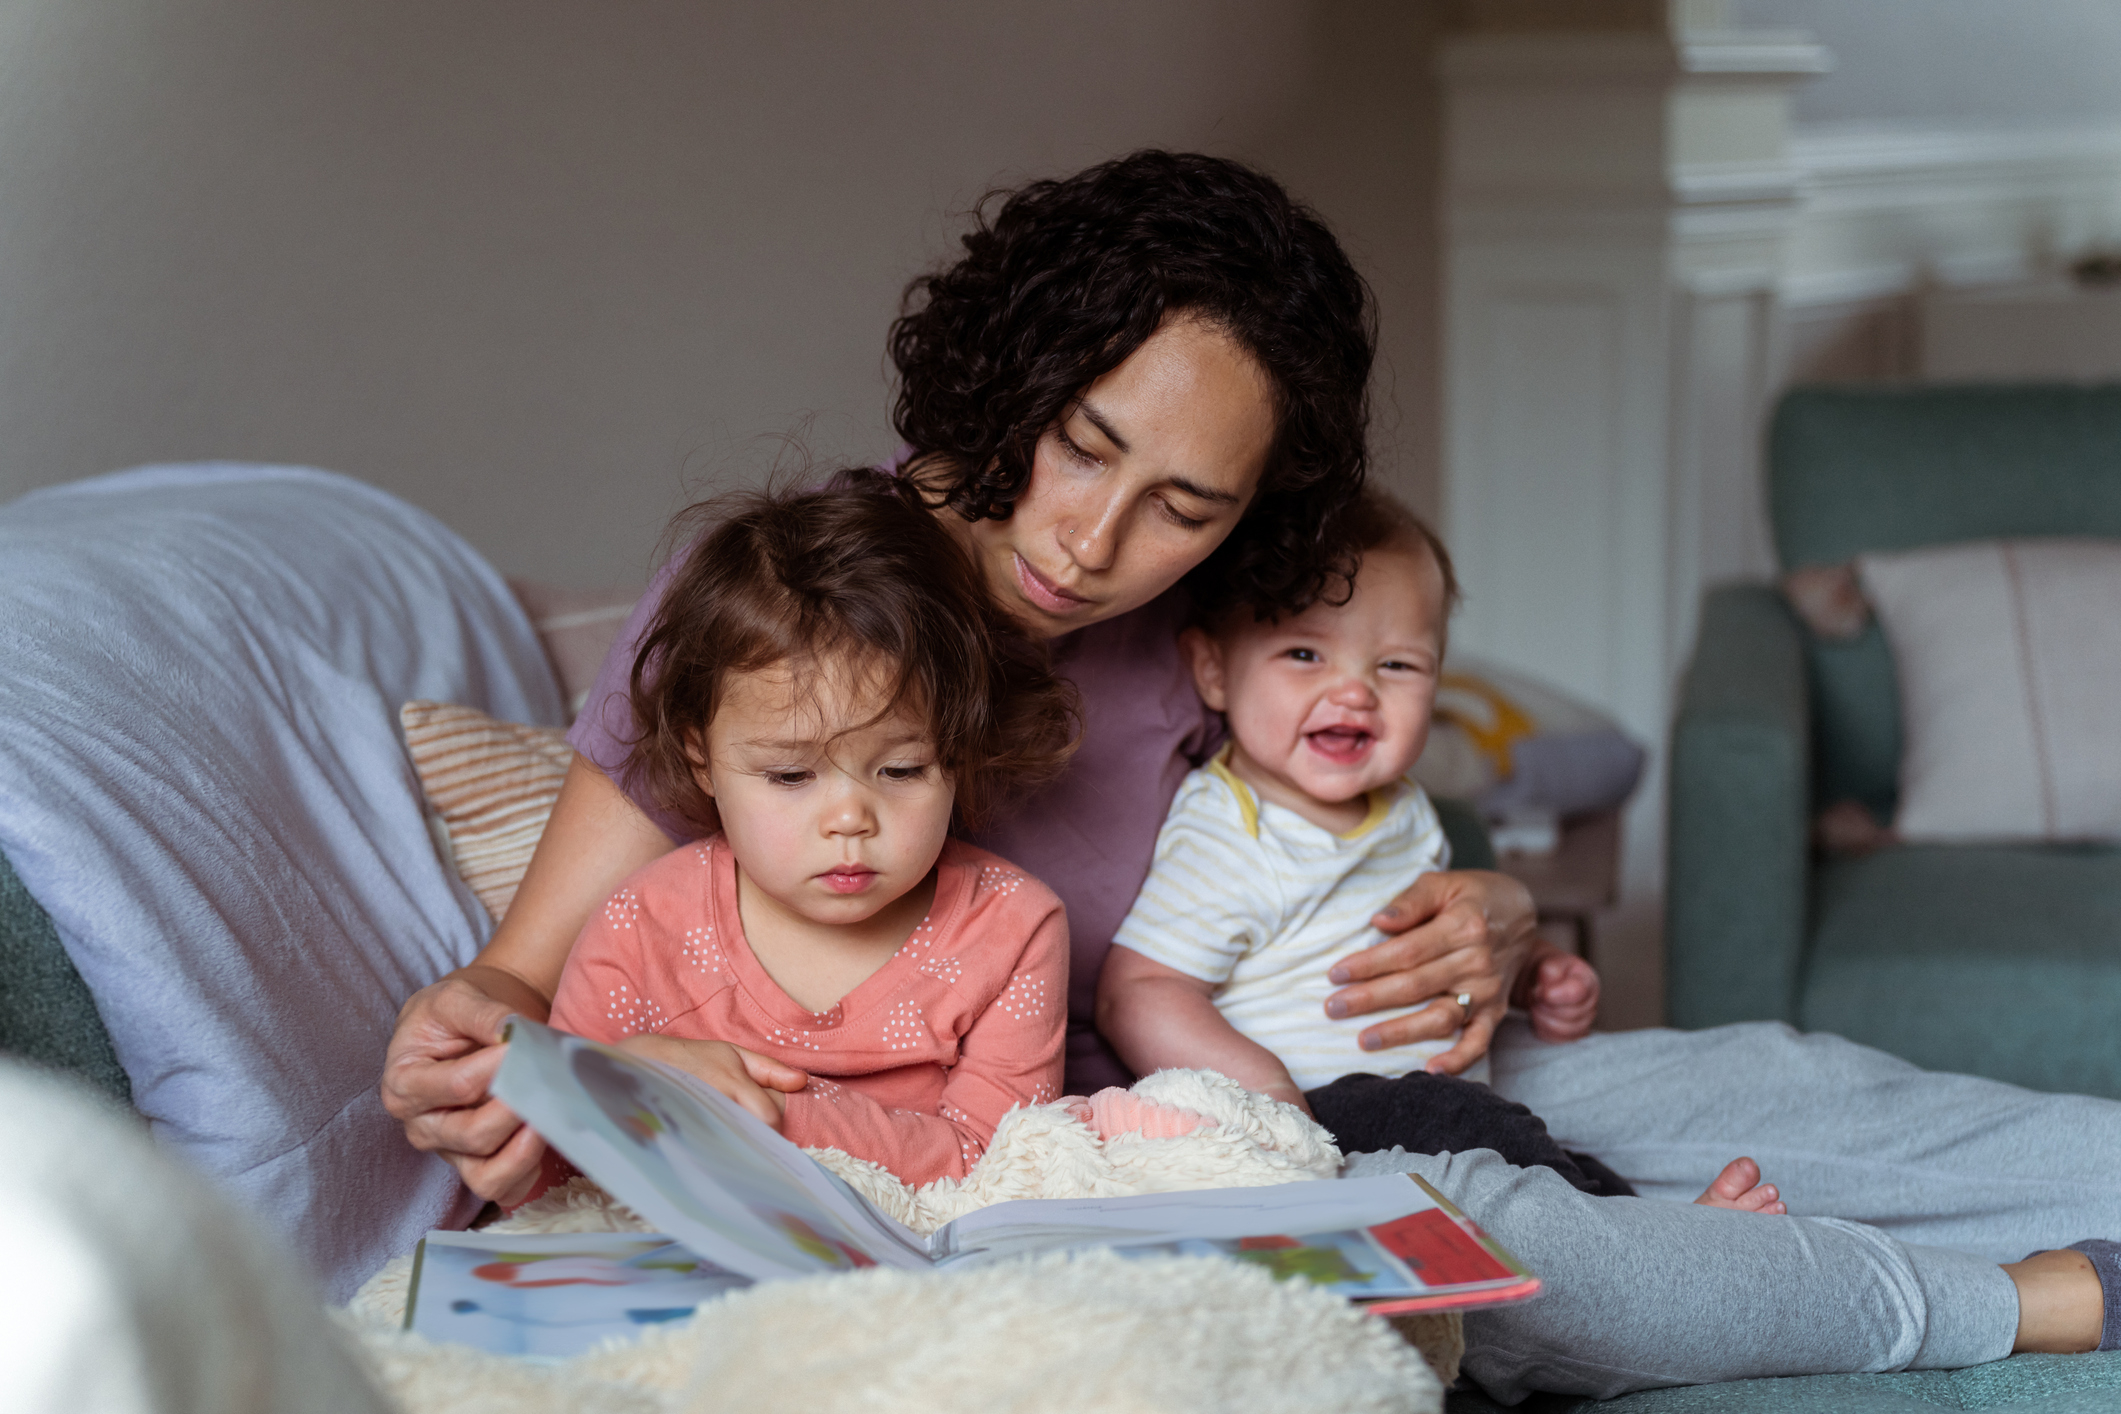 Woman reads book with toddler and baby smiling on bed